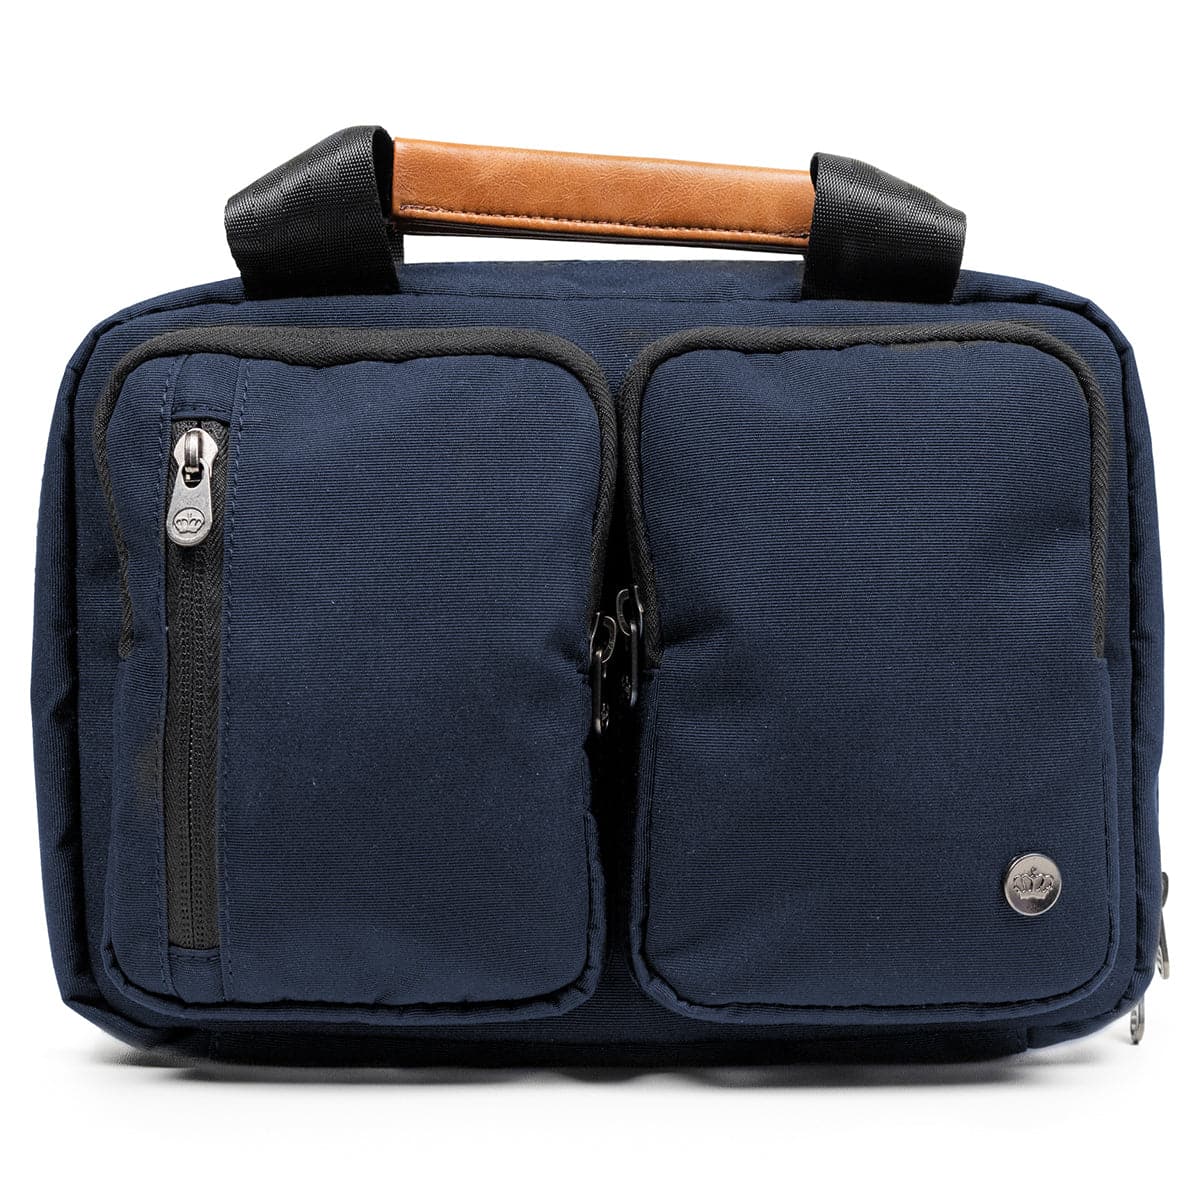 PKG Simcoe Recycled Toiletry Bag